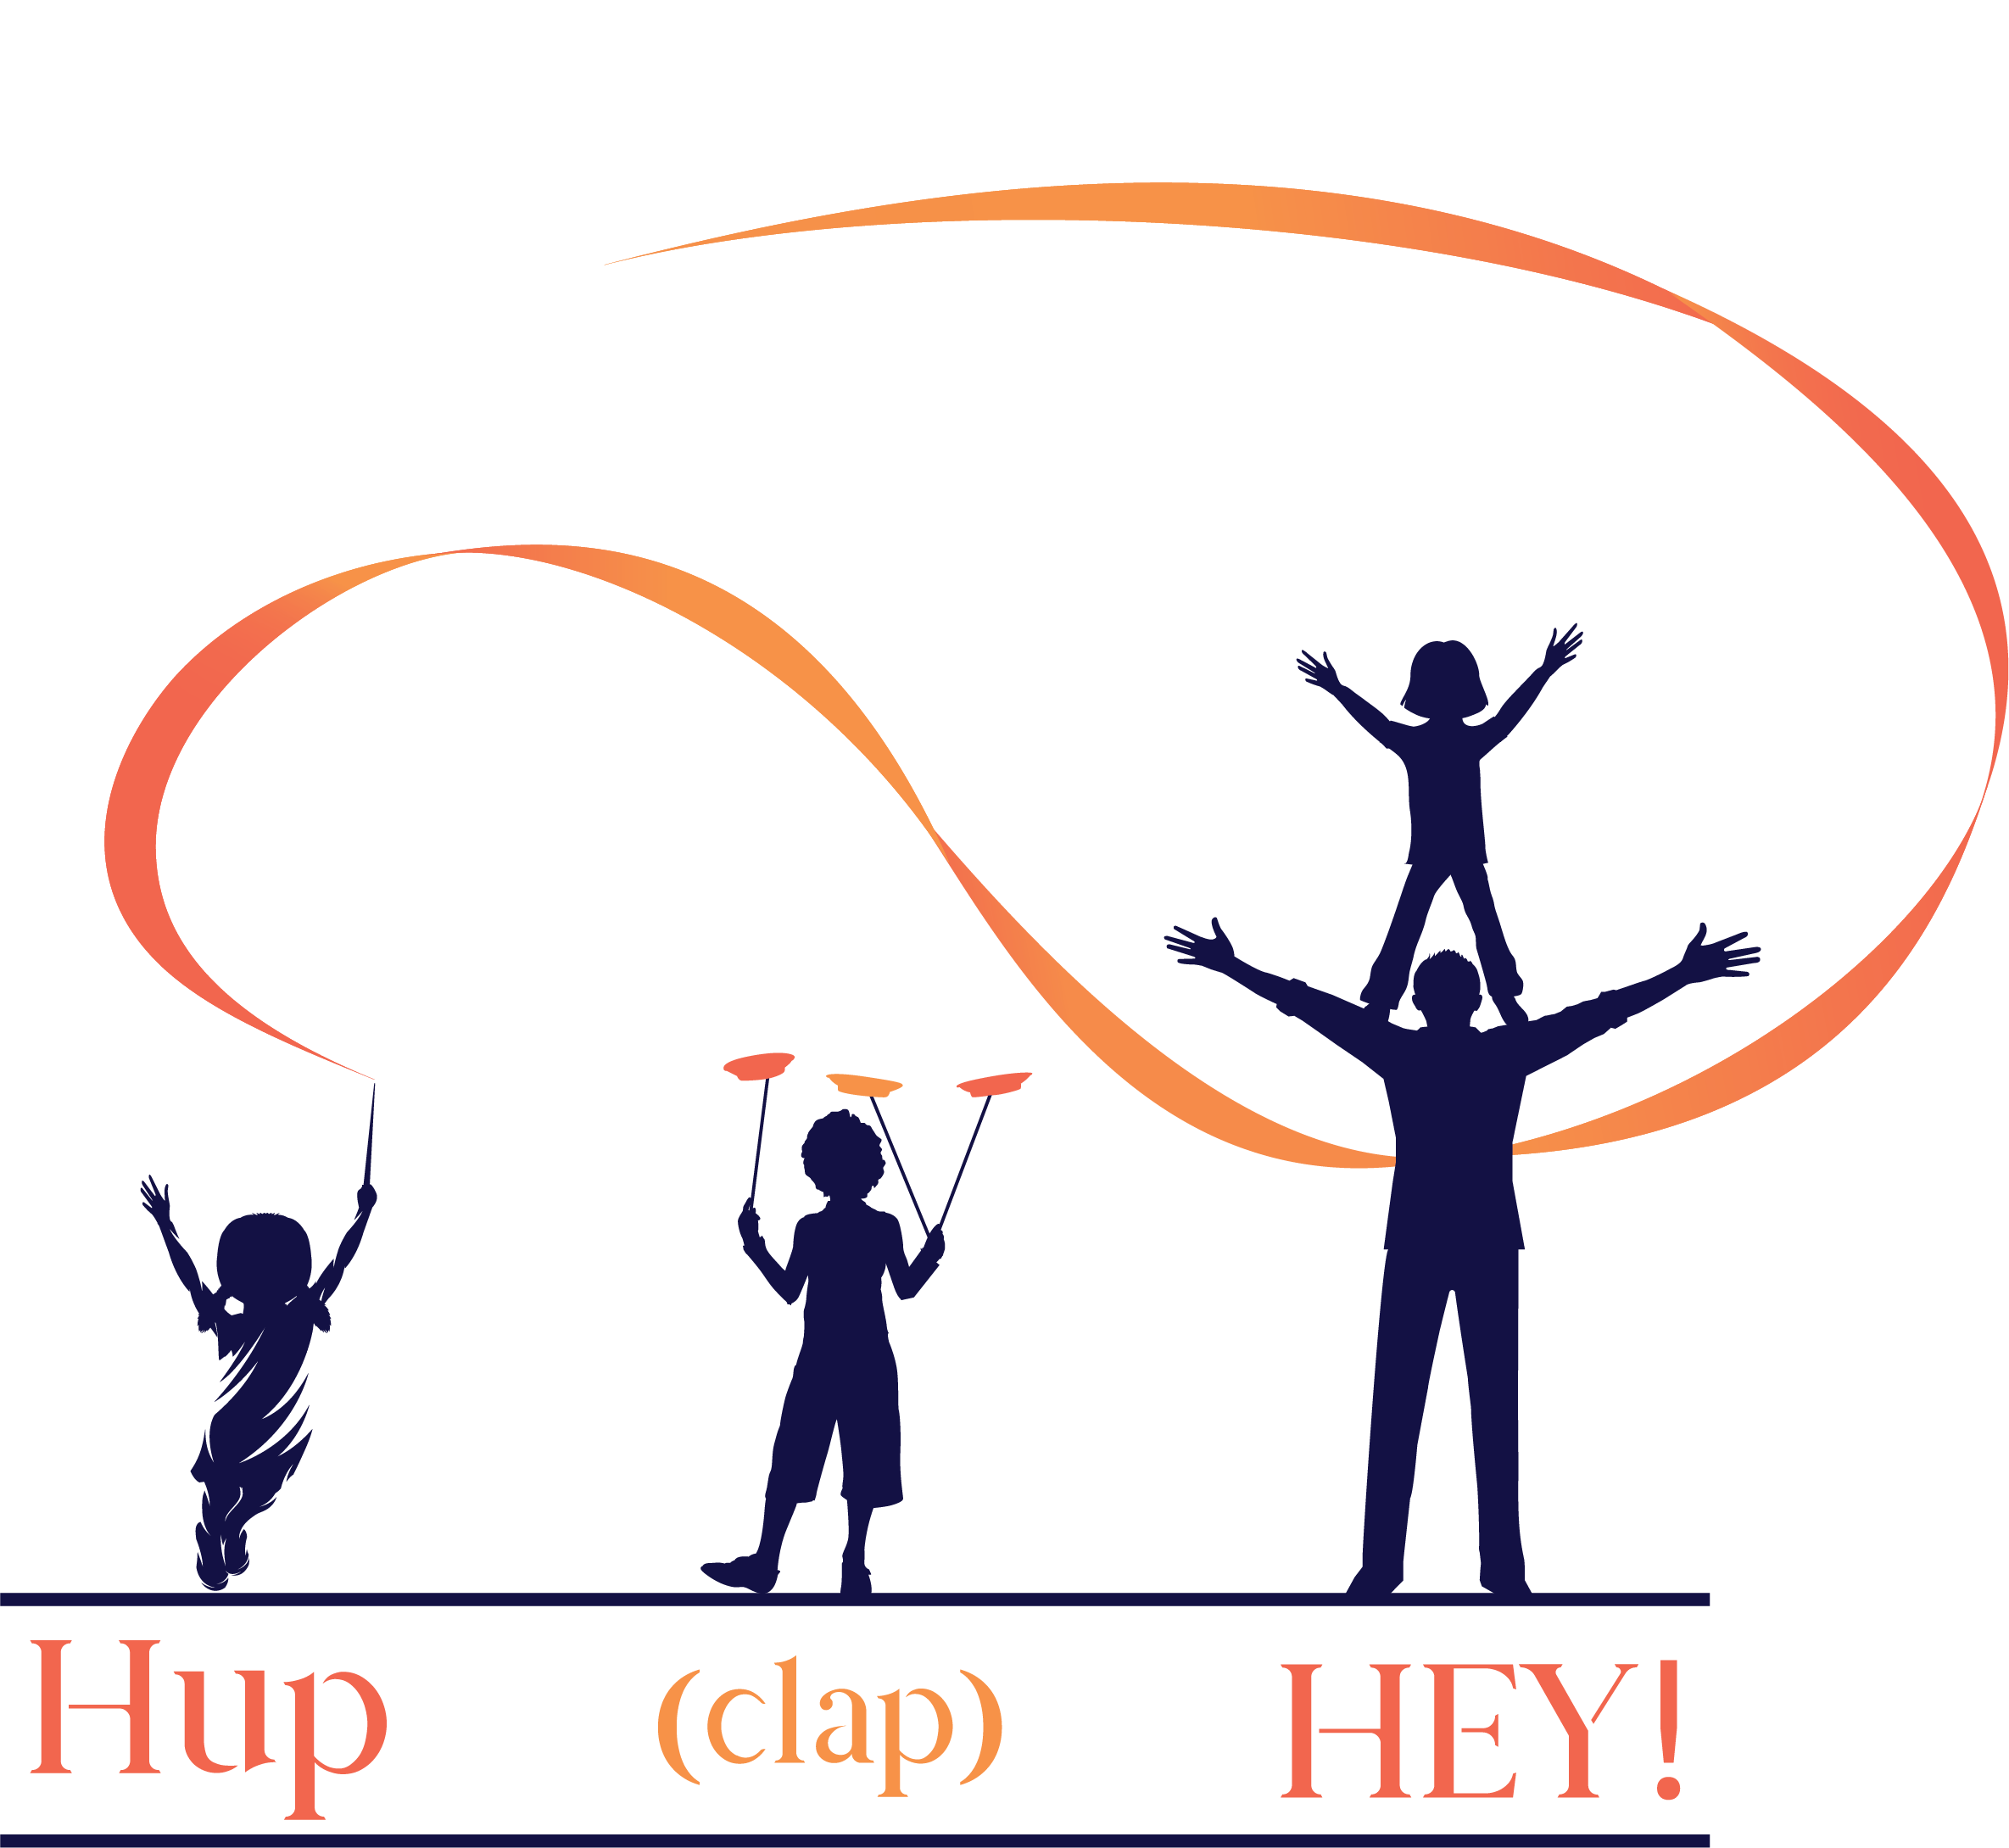 Hup (clap) HEY!